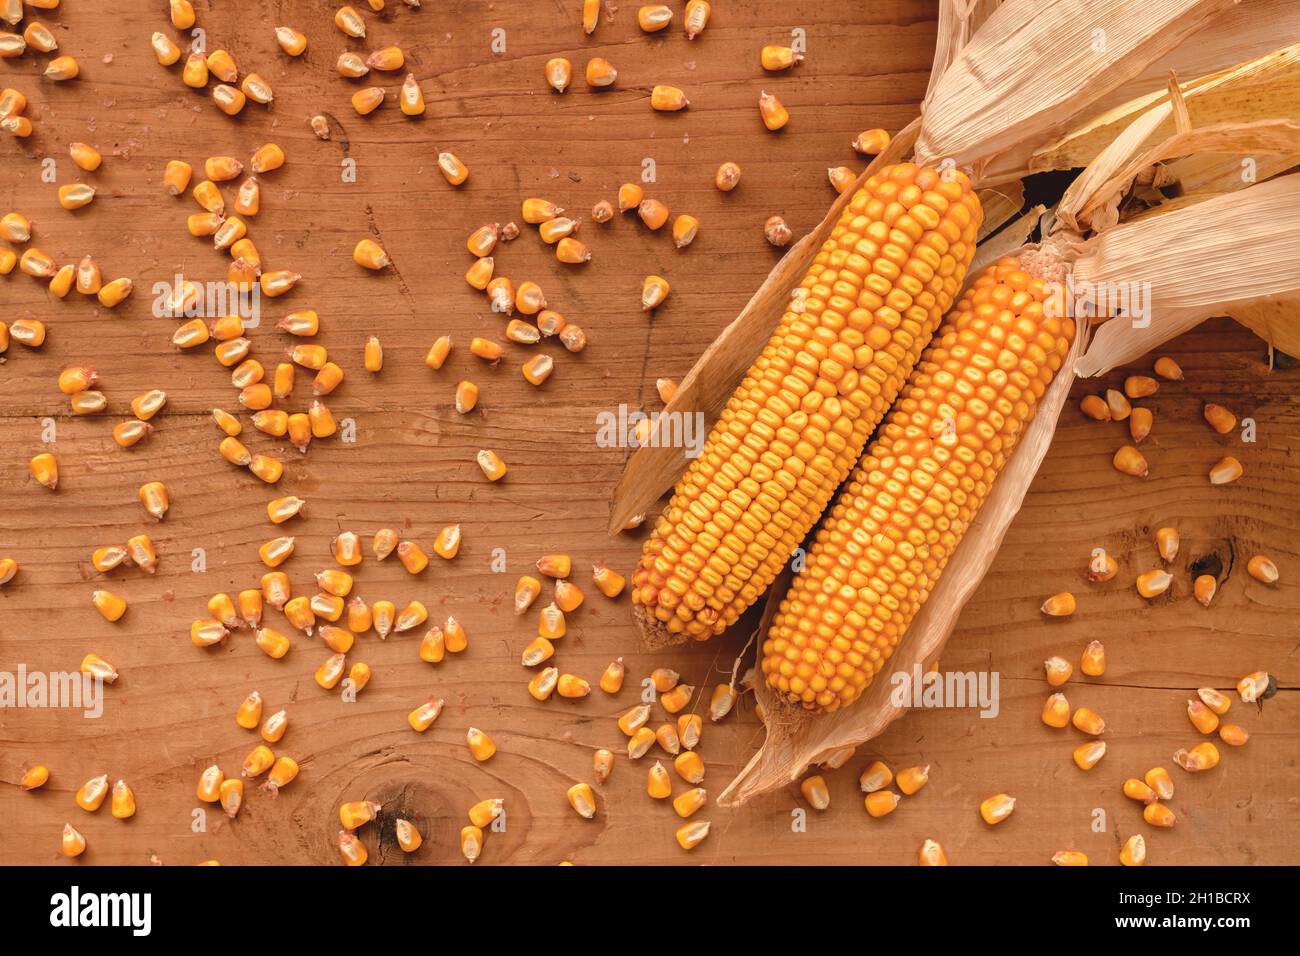 Corncobs and grain on rustic wooden background, top view of harvested maize crops for agricultural and cultivation concepts Stock Photo